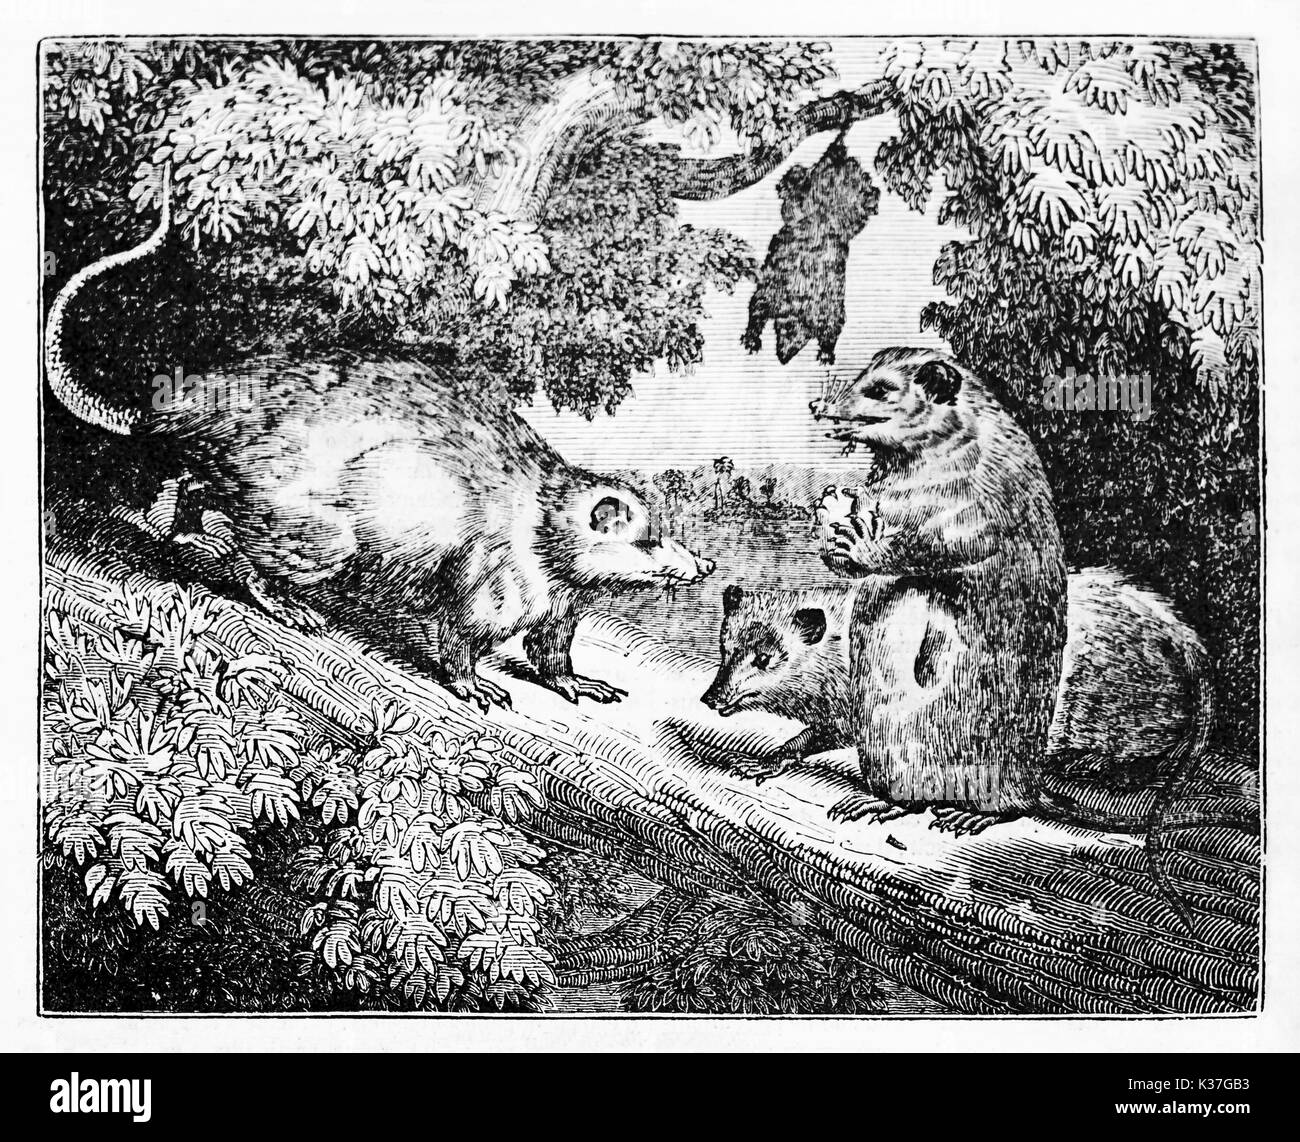 Virginia Opossums (Didelphis virginiana) in their natural environment, hided in a bush on a branch. Old Illustration by unidentified author, published on Magasin Pittoresque, Paris, 1834 Stock Photo